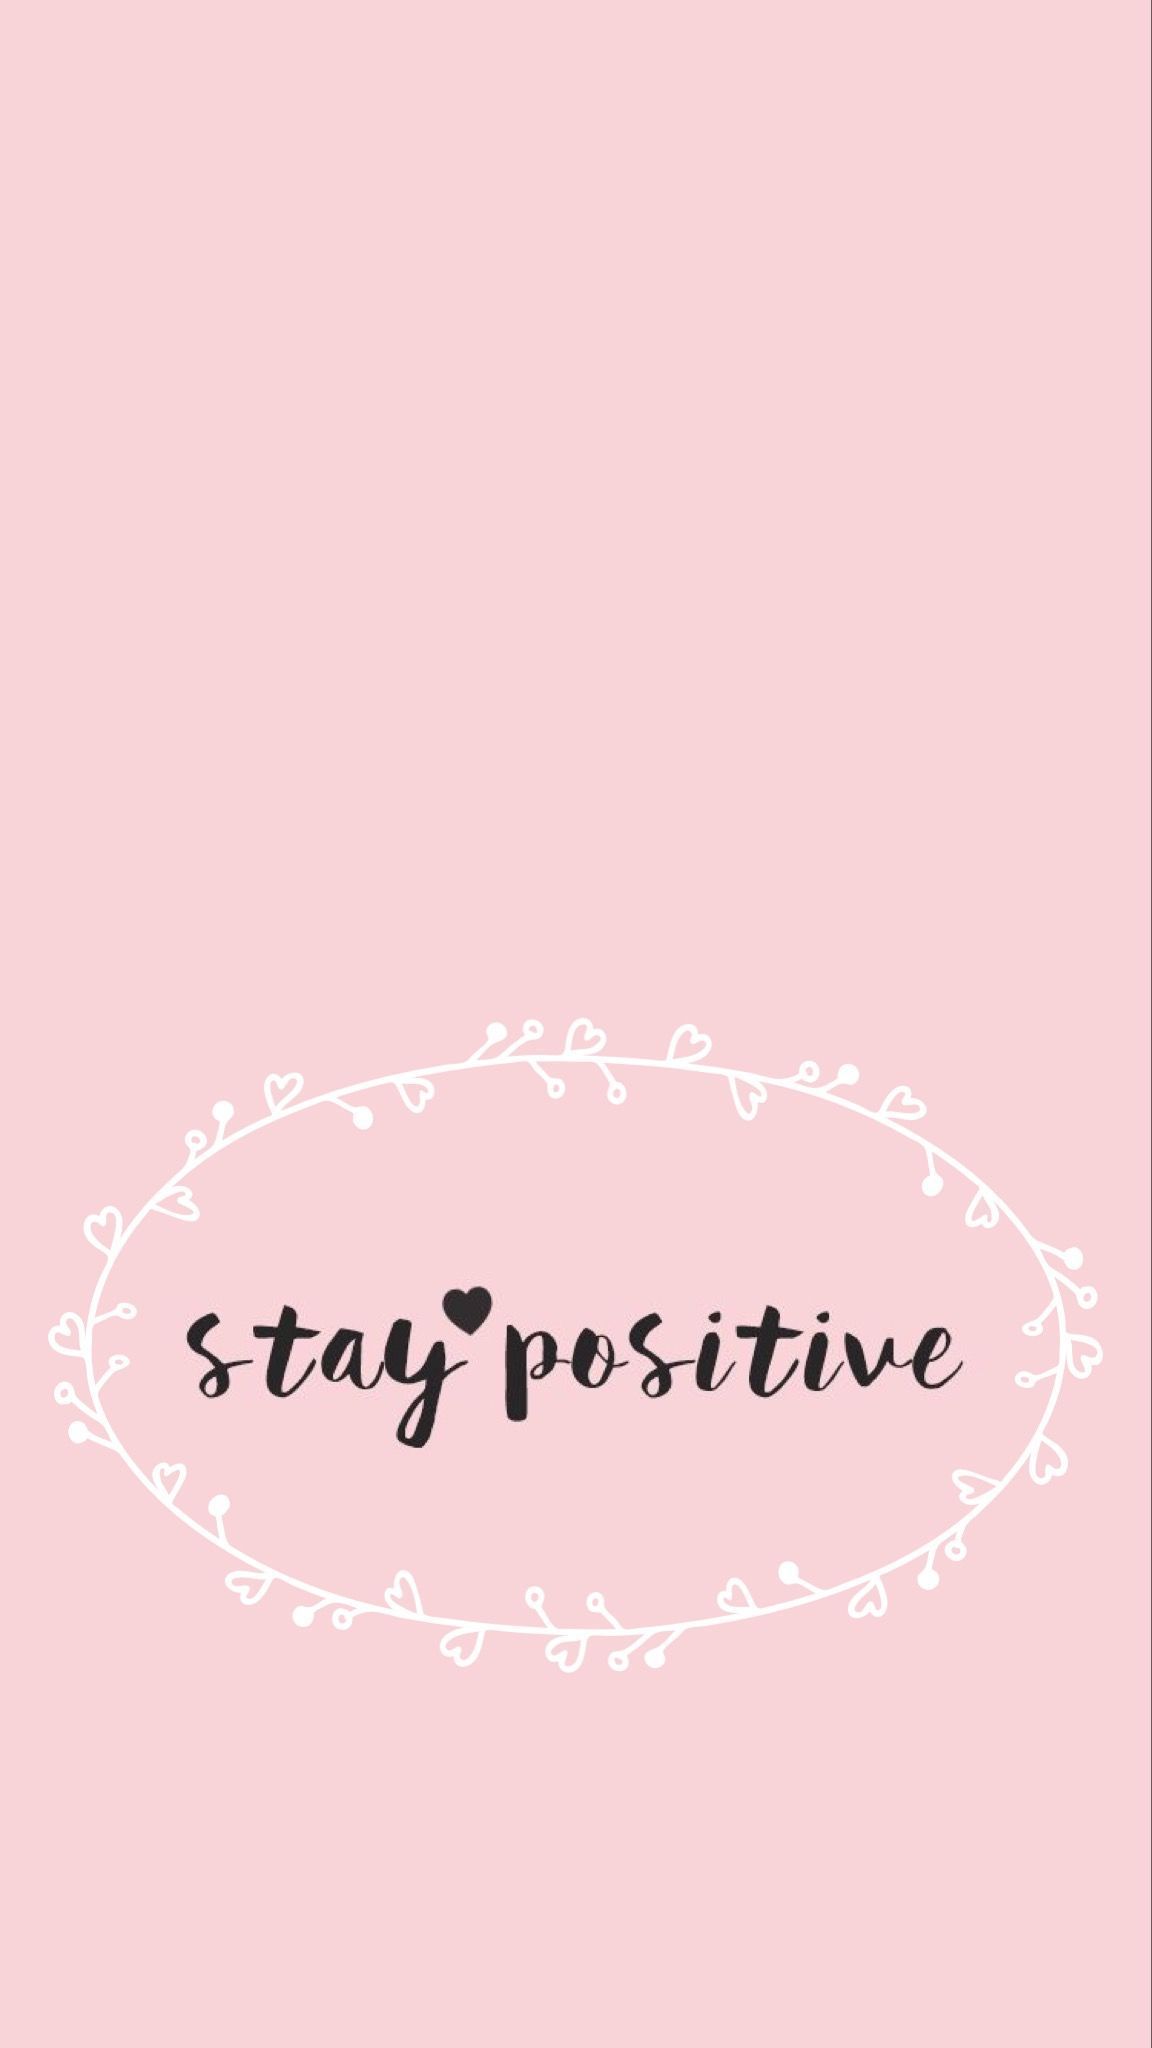 Positive Words Wallpaper Free Positive Words Background